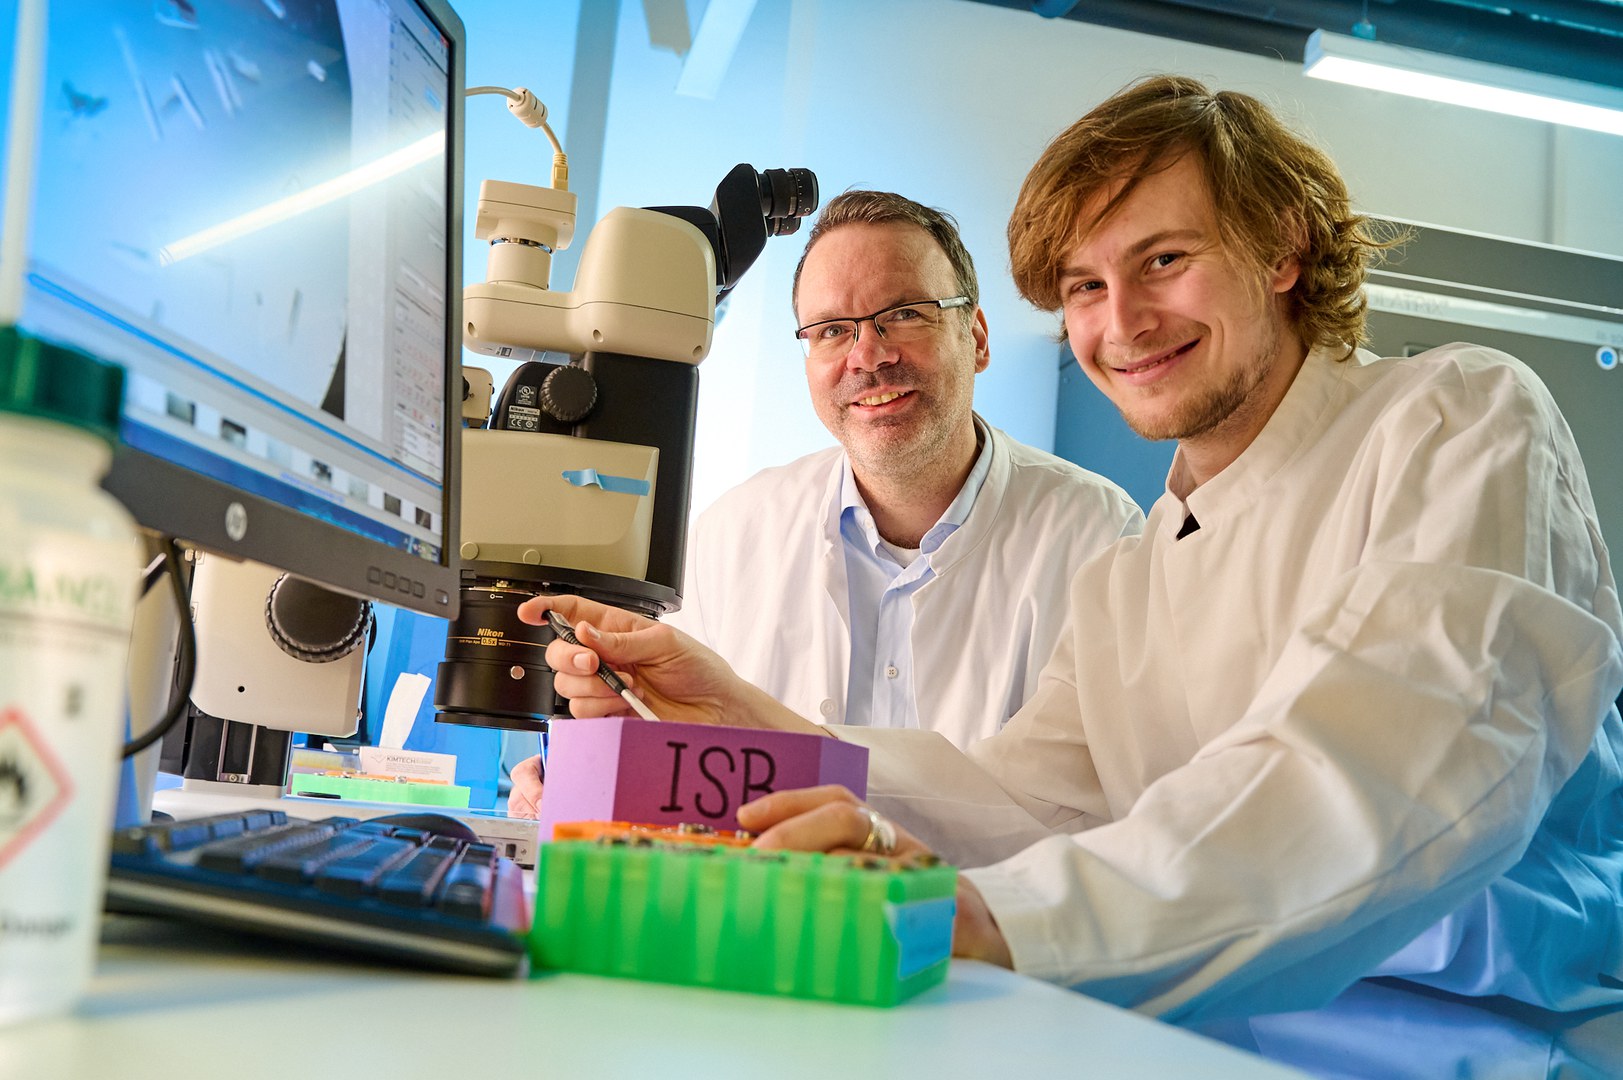 In the lab: (from the left) PD Dr. Gregor Hagelueken, group leader at the Institute of Structural Biology at UKB, and Niels Schneberger, doctoral student at UKB's Institute of Structural Biology, are freezing protein crystals.